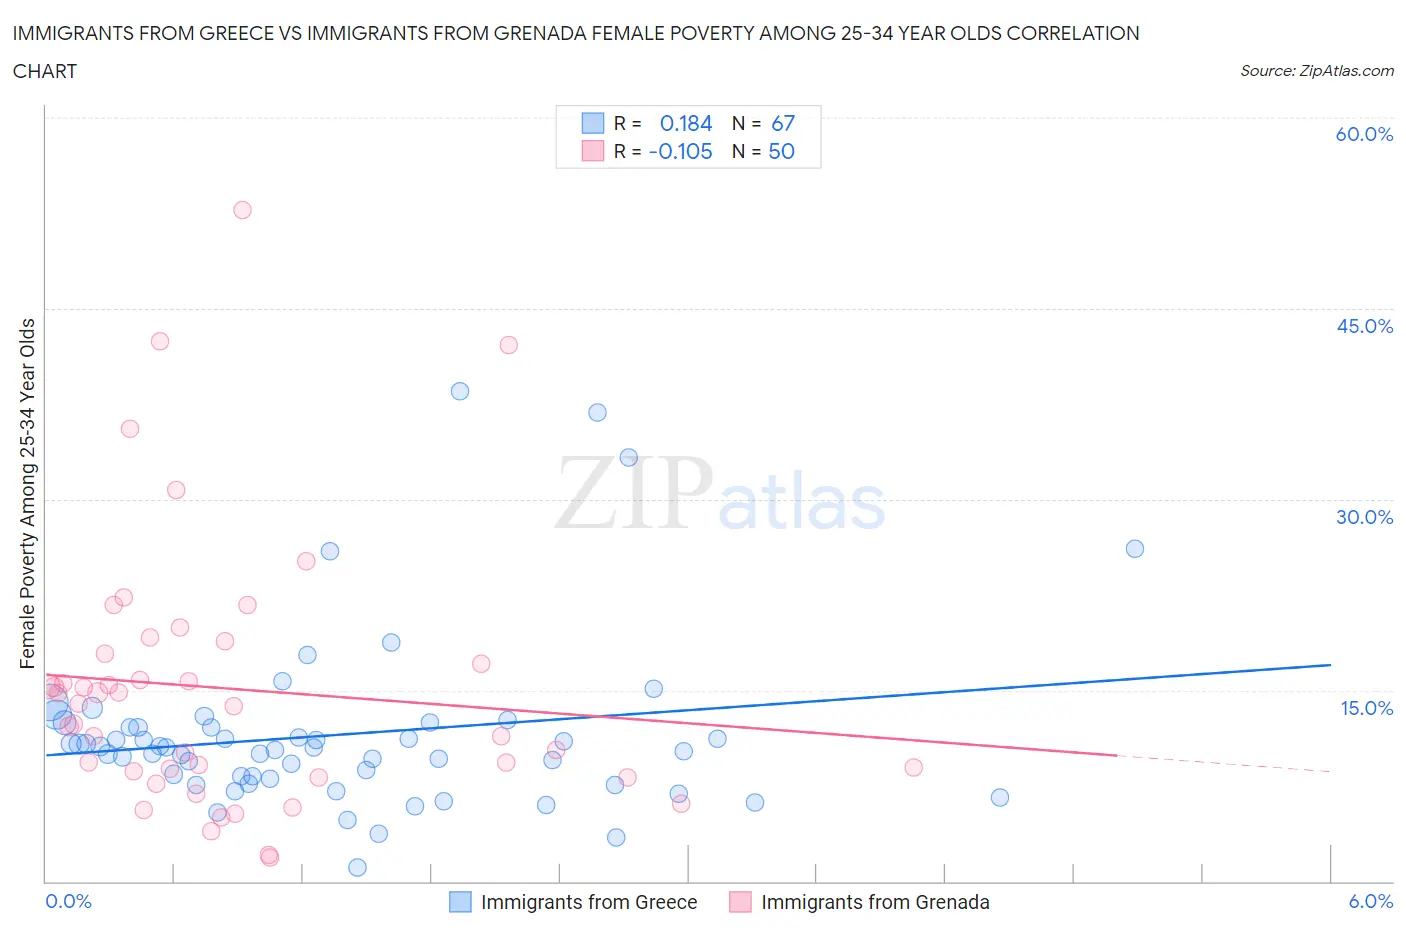 Immigrants from Greece vs Immigrants from Grenada Female Poverty Among 25-34 Year Olds